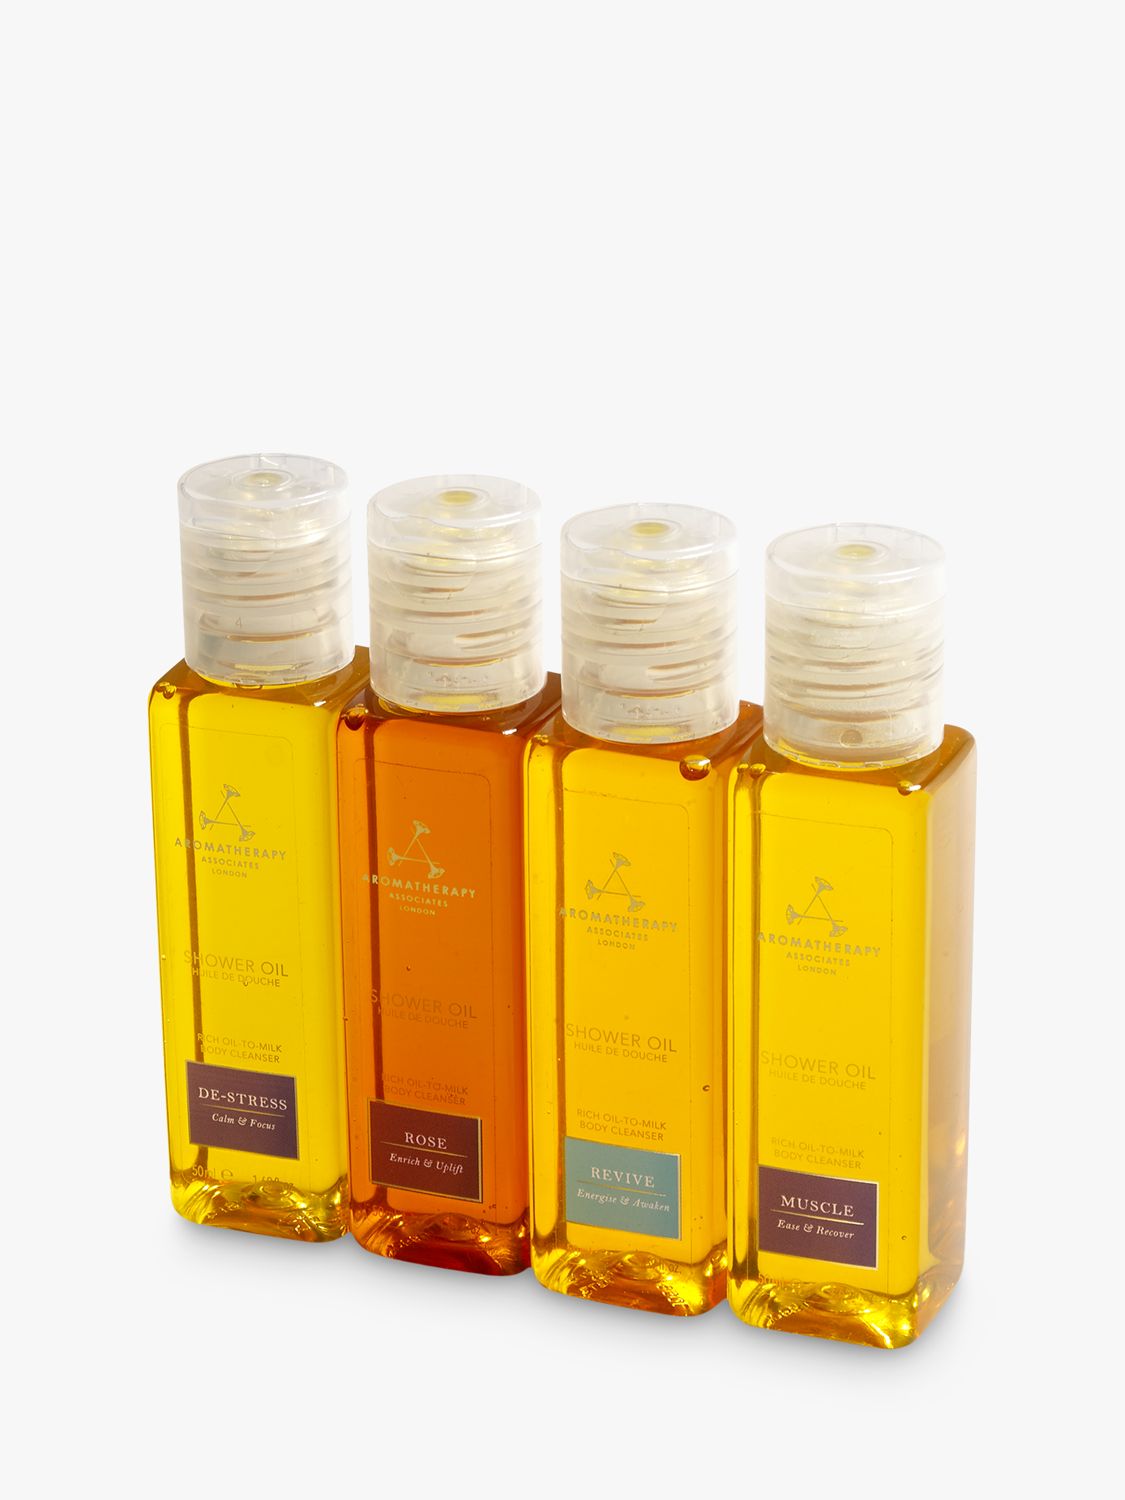 Aromatherapy Associates Shower Oil Discovery Collection Bodycare Gift Set 2